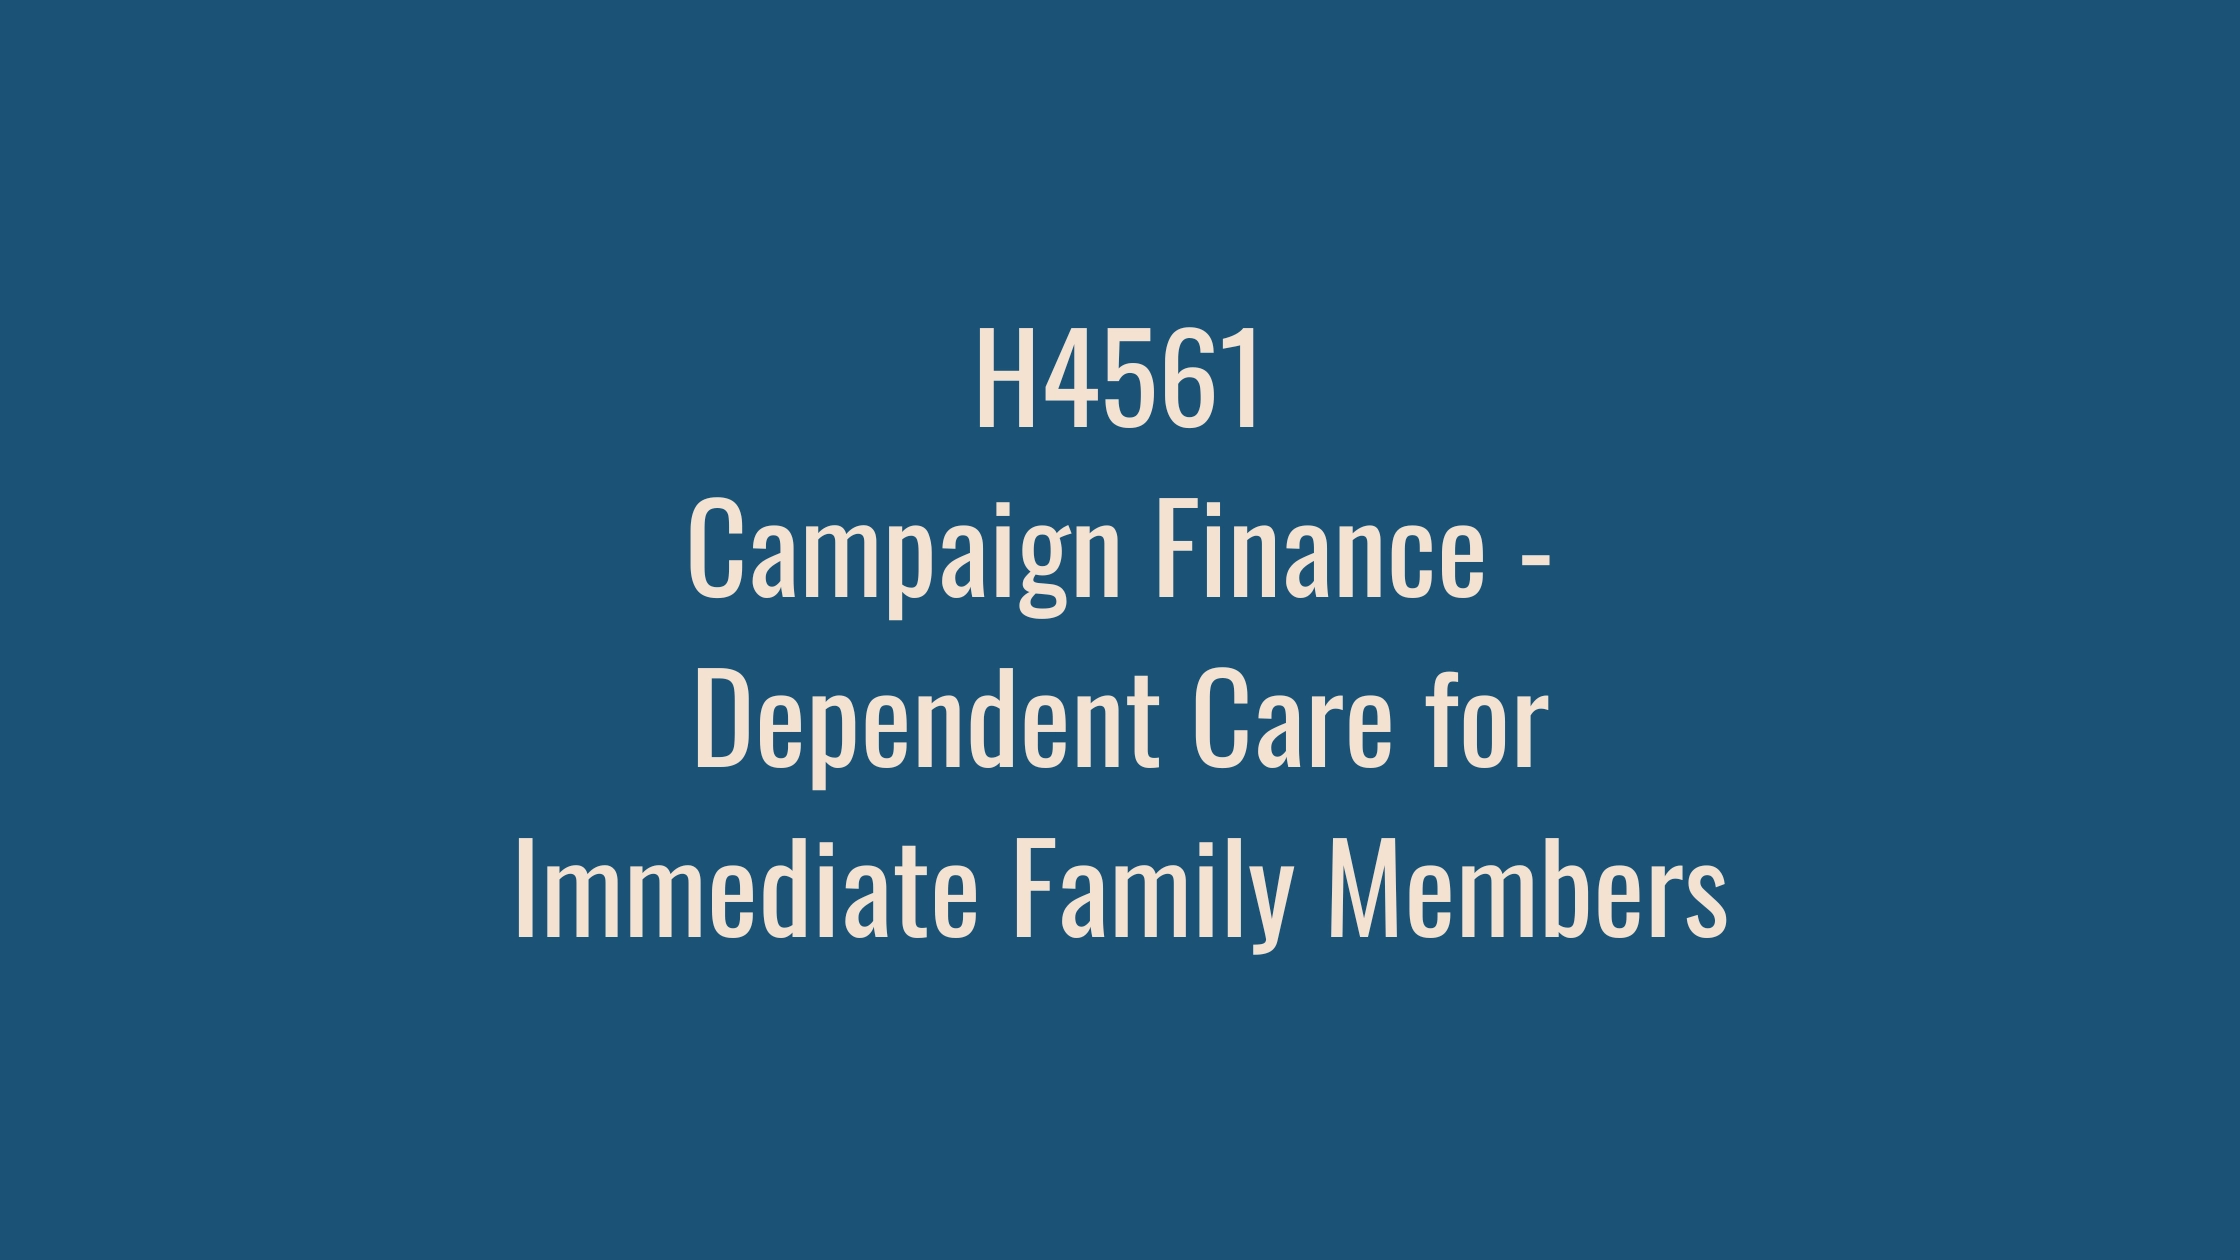 H4561: Campaign Finance - Dependent Care for Immediate Family Members